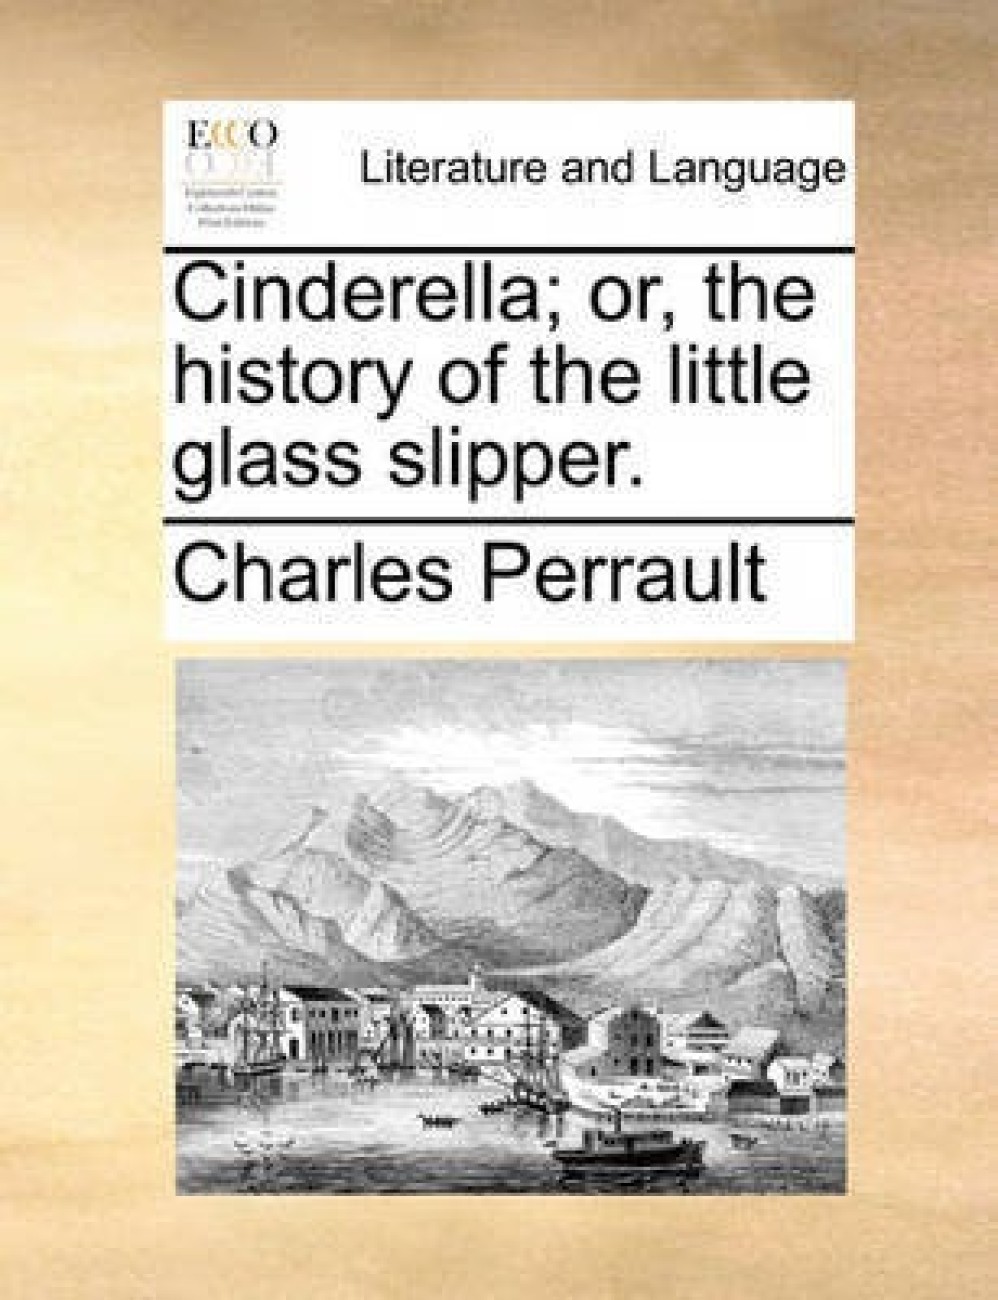 Charles Perrault and the Glass Slipper